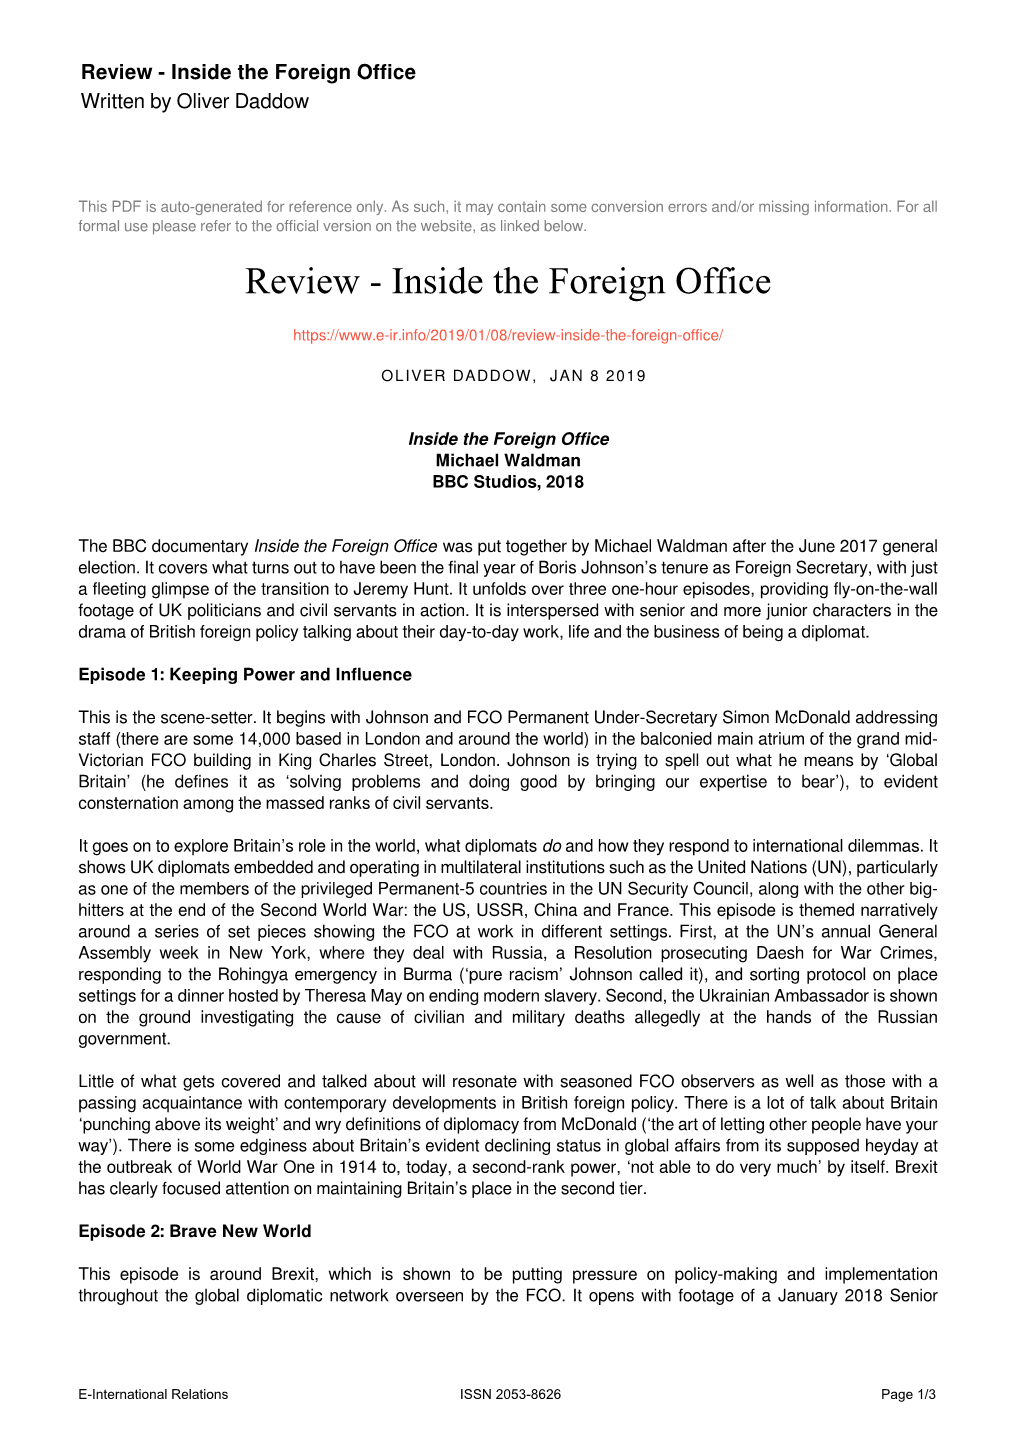 Inside the Foreign Office Written by Oliver Daddow